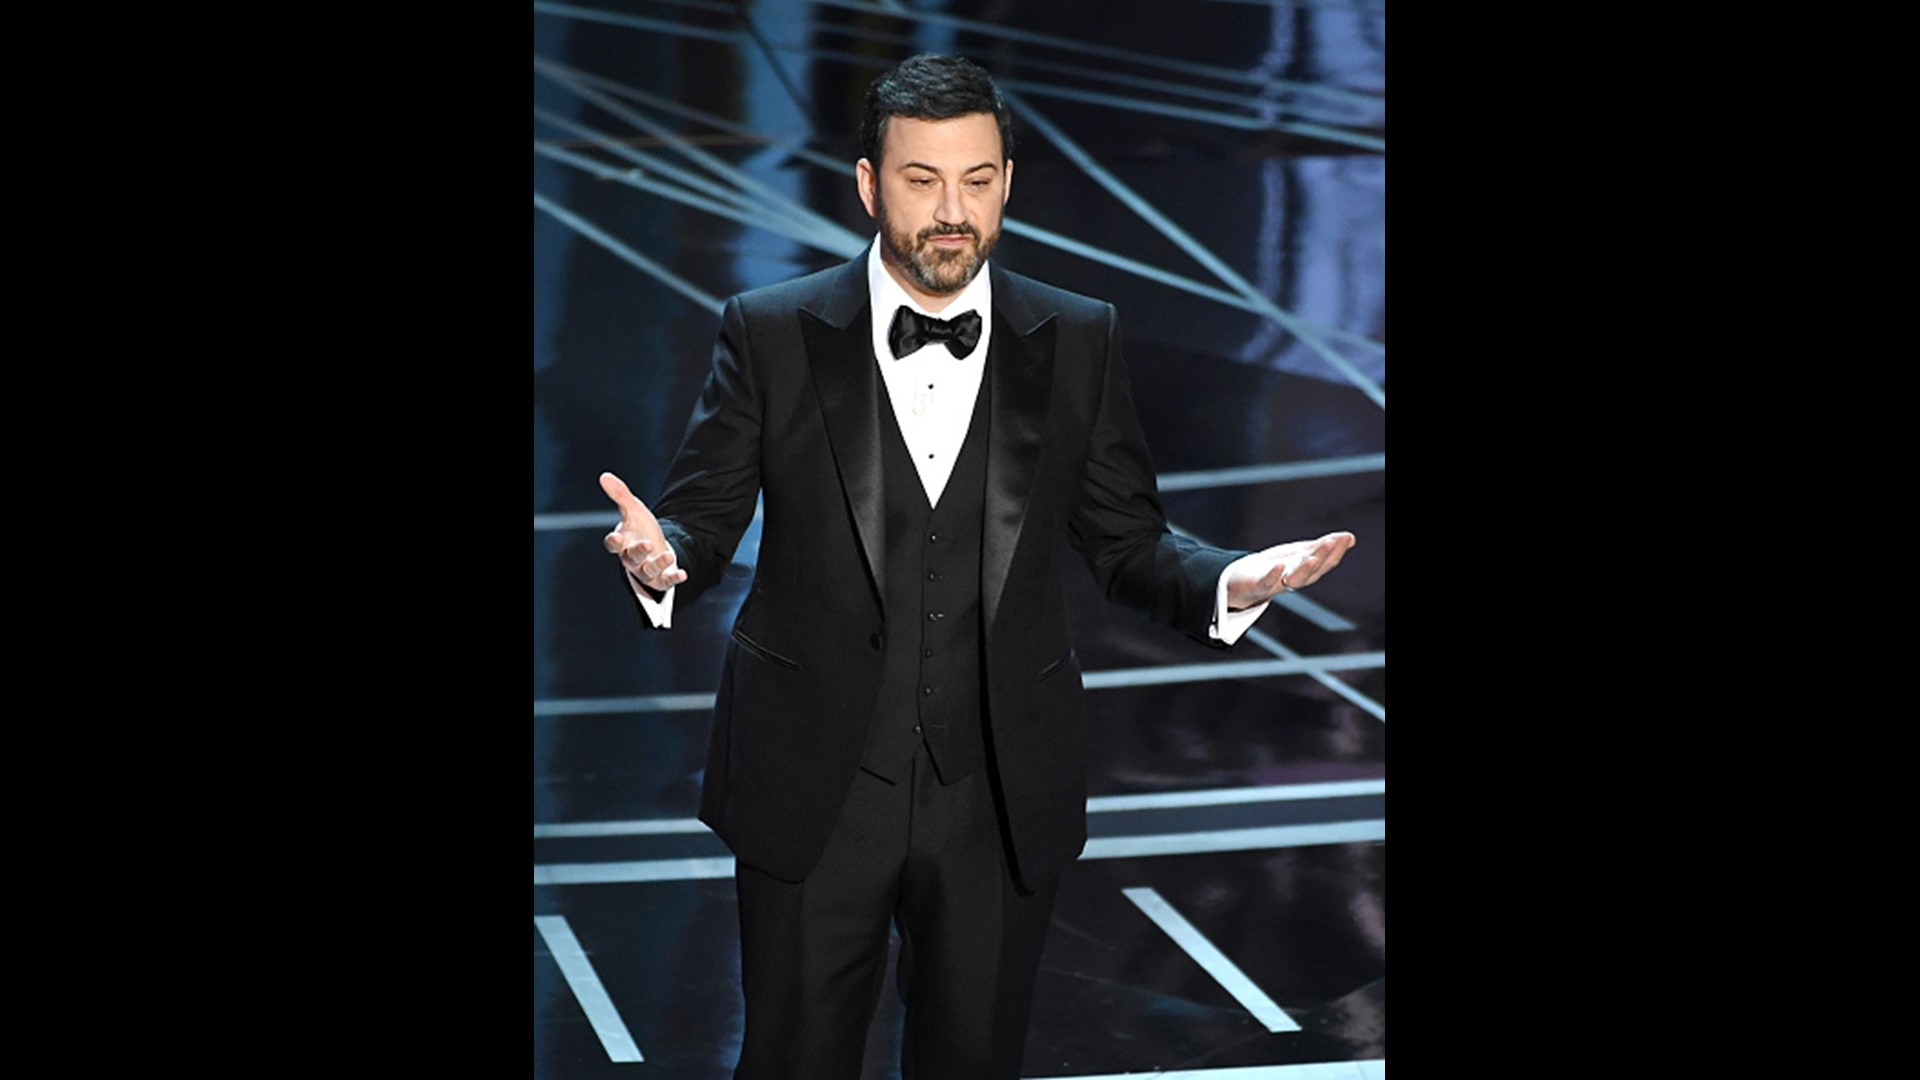 Jimmy Kimmel is hosting the 2020 Emmy Awards, Amanda Seales will host the BET Awards, and Gwen  Stefani is back on 'The Voice' | Entertainment News